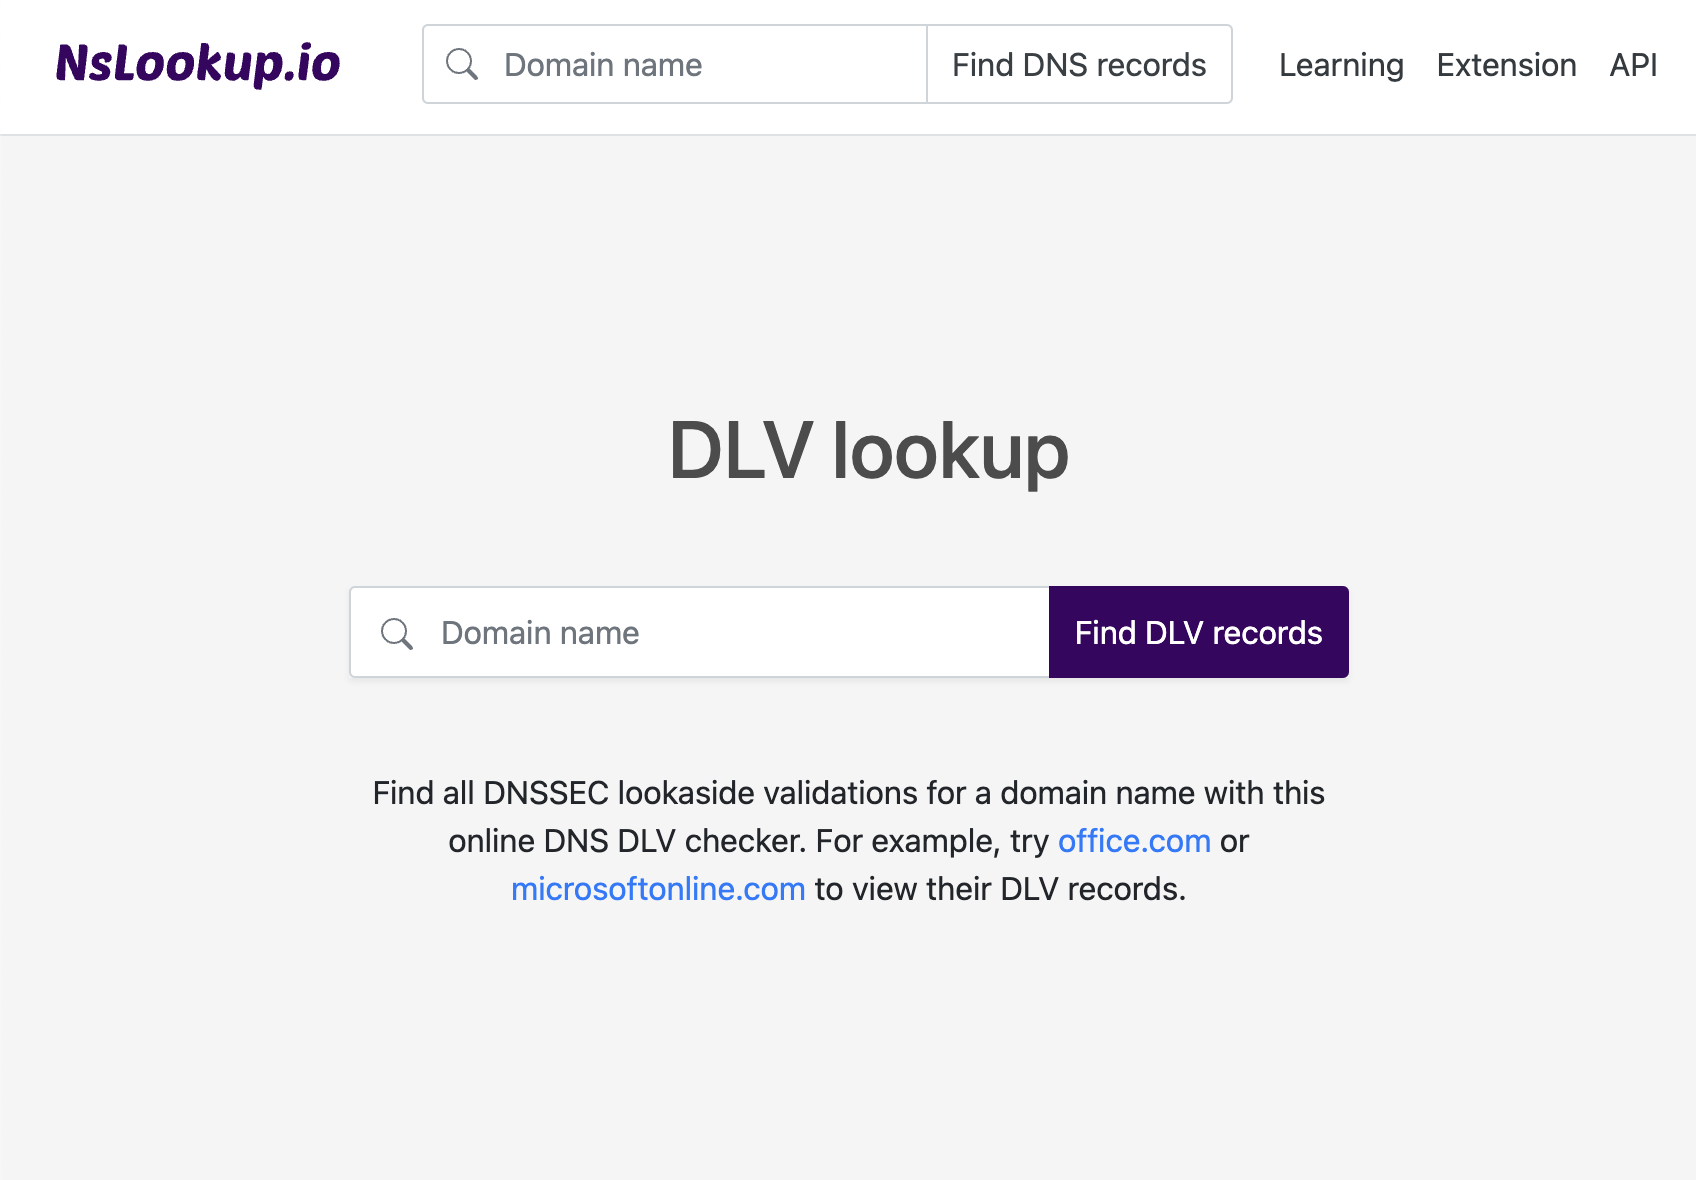 Open the DLV lookup tool